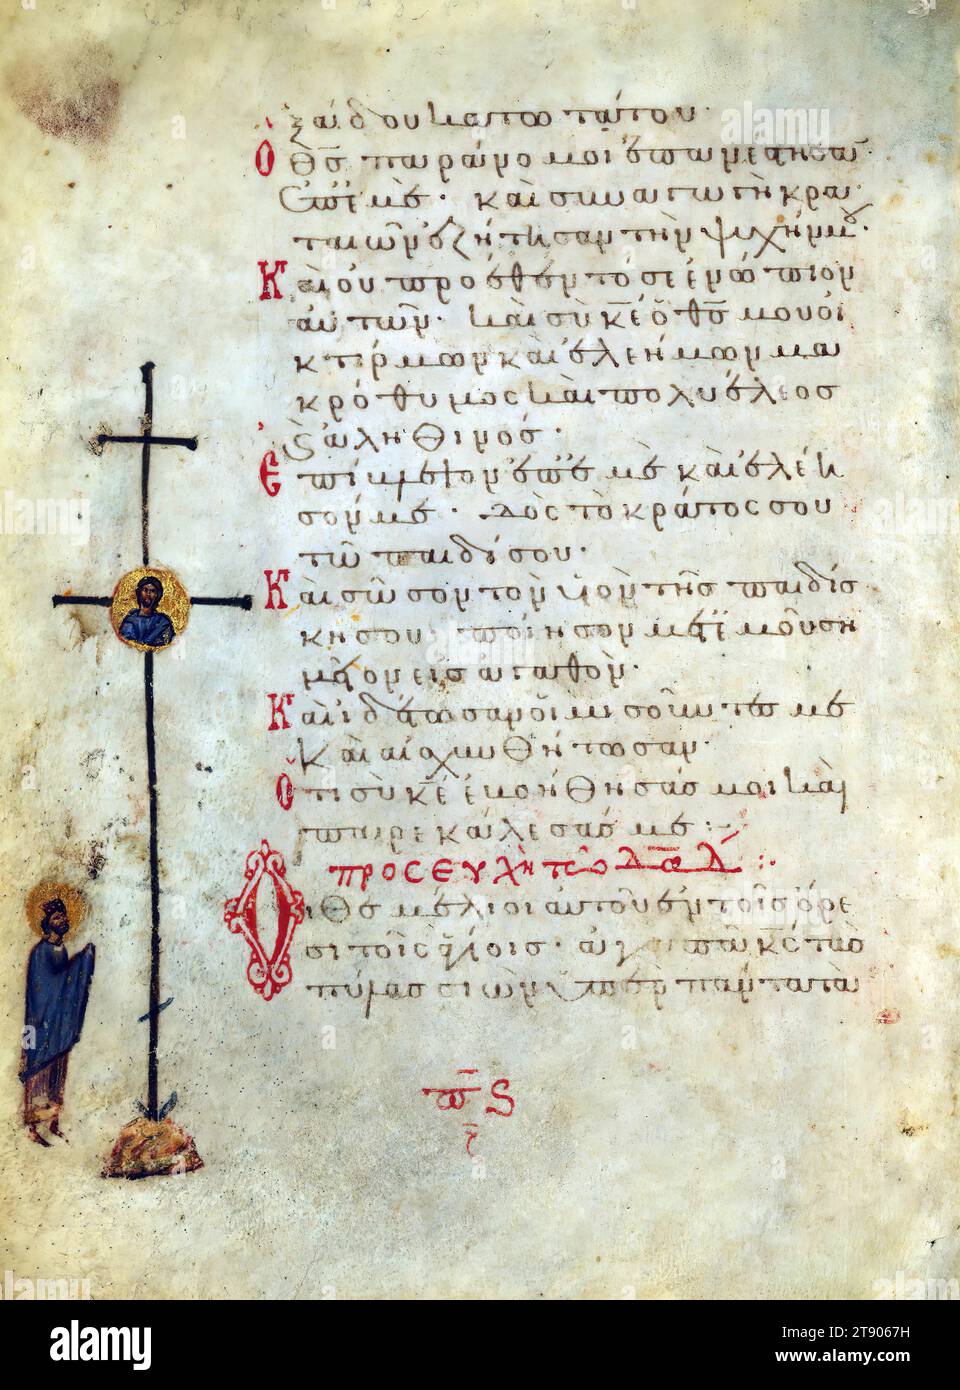 Psalter, David Praying; The Cross on Golgotha, This manuscript, illustrated with 155 marginal paintings, is one the few surviving 'marginal psalters,' in which images provide a pictorial commentary on the Biblical text. Other examples include the Khludov Psalter, the Barberini Psalter, the Theodore Psalter, and a Cyrillic psalter made in Kiev Stock Photo